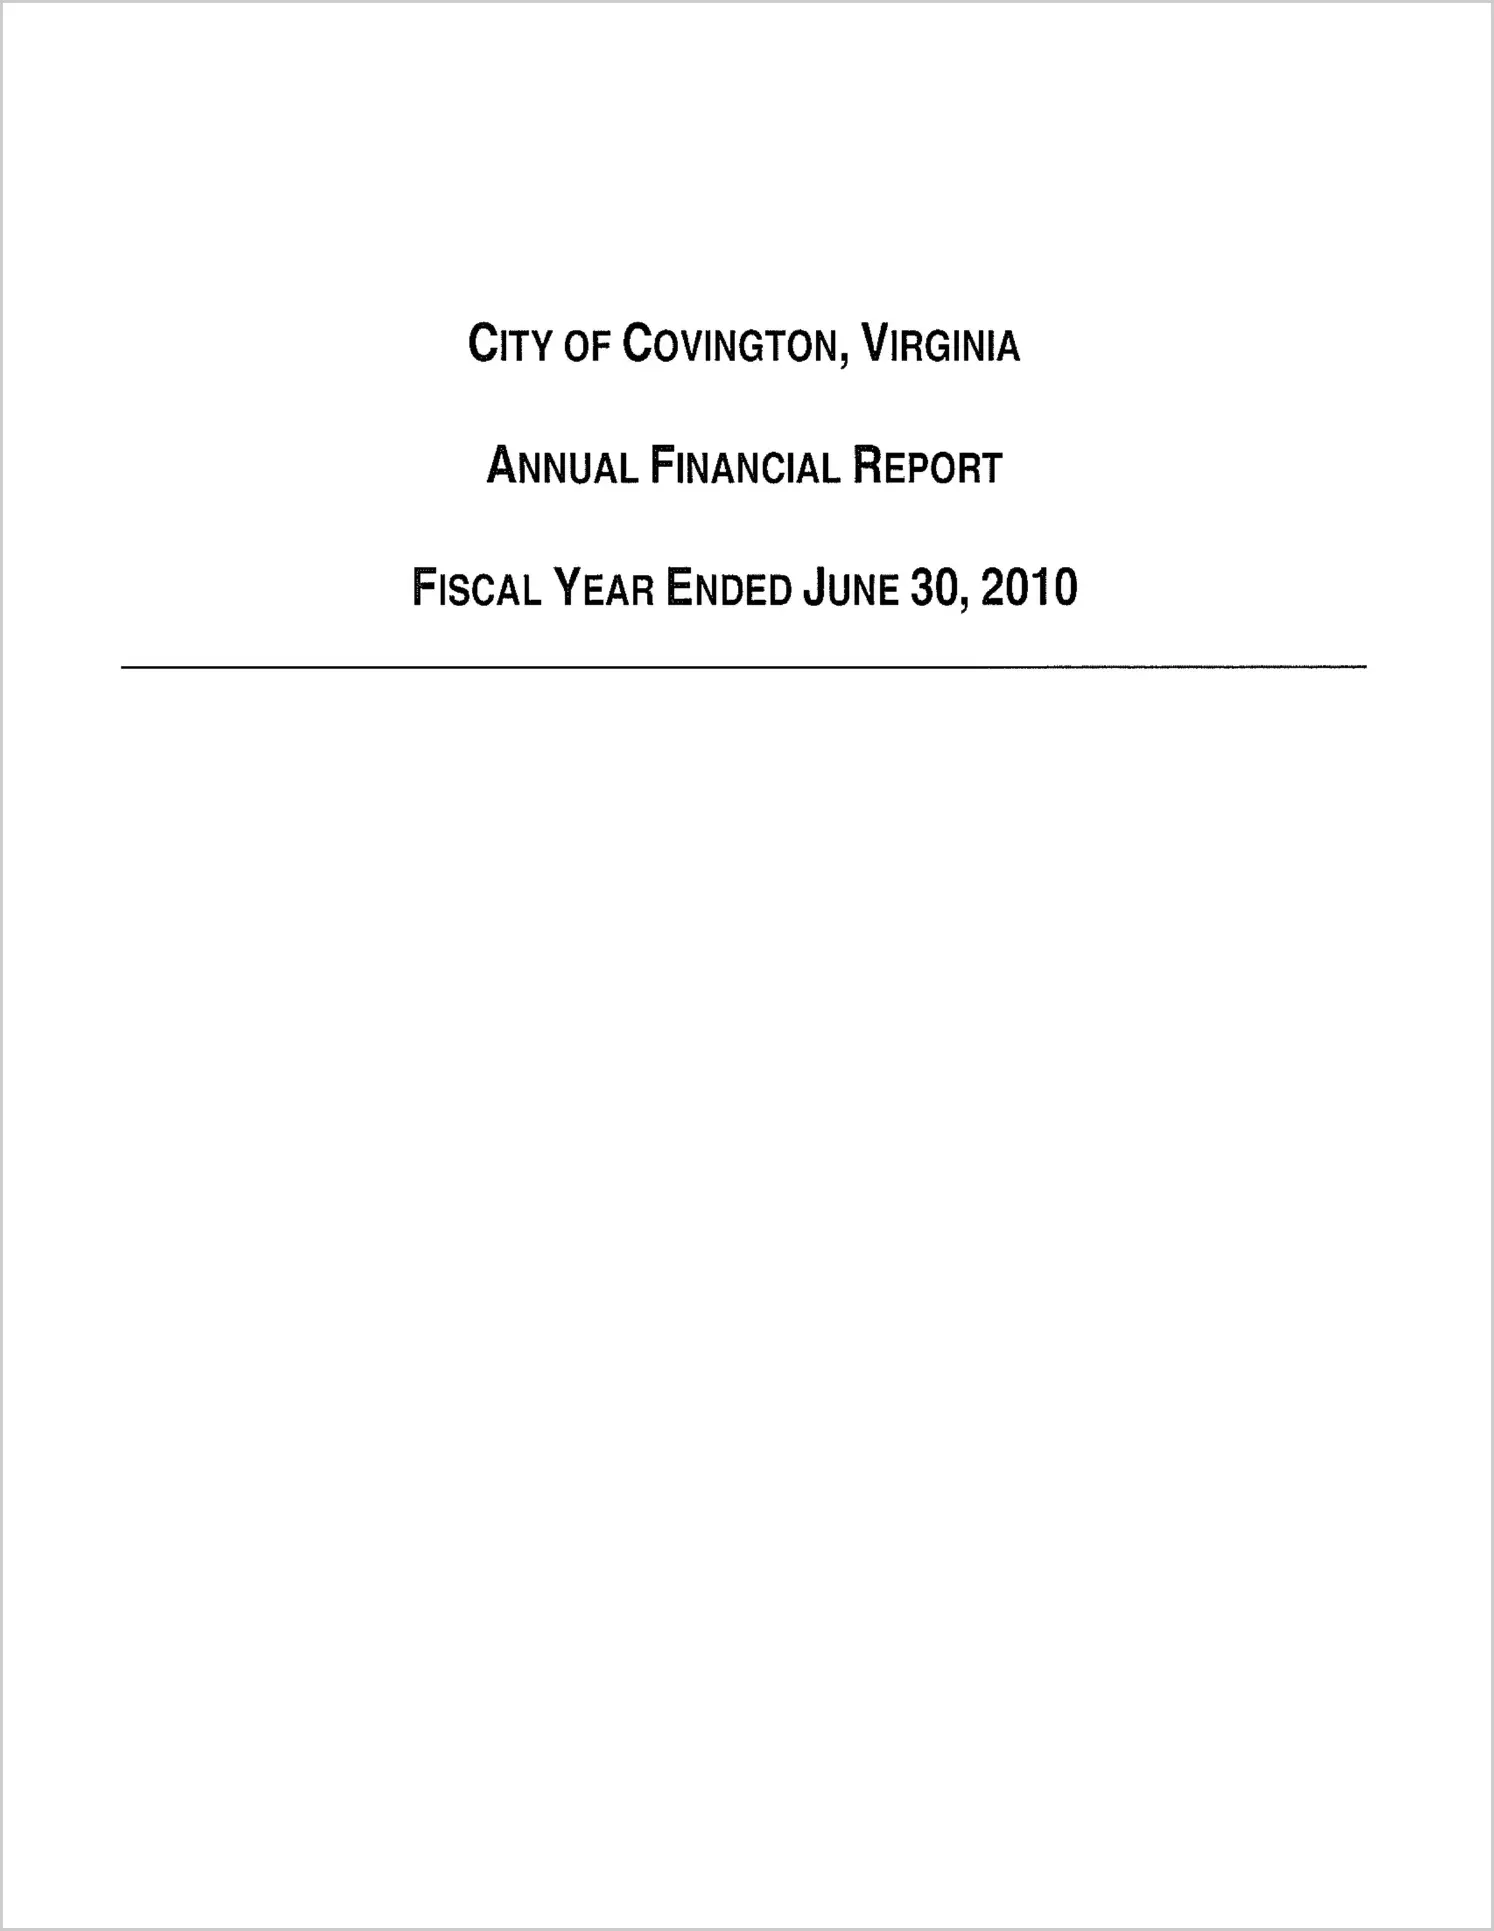 2010 Annual Financial Report for City of Covington